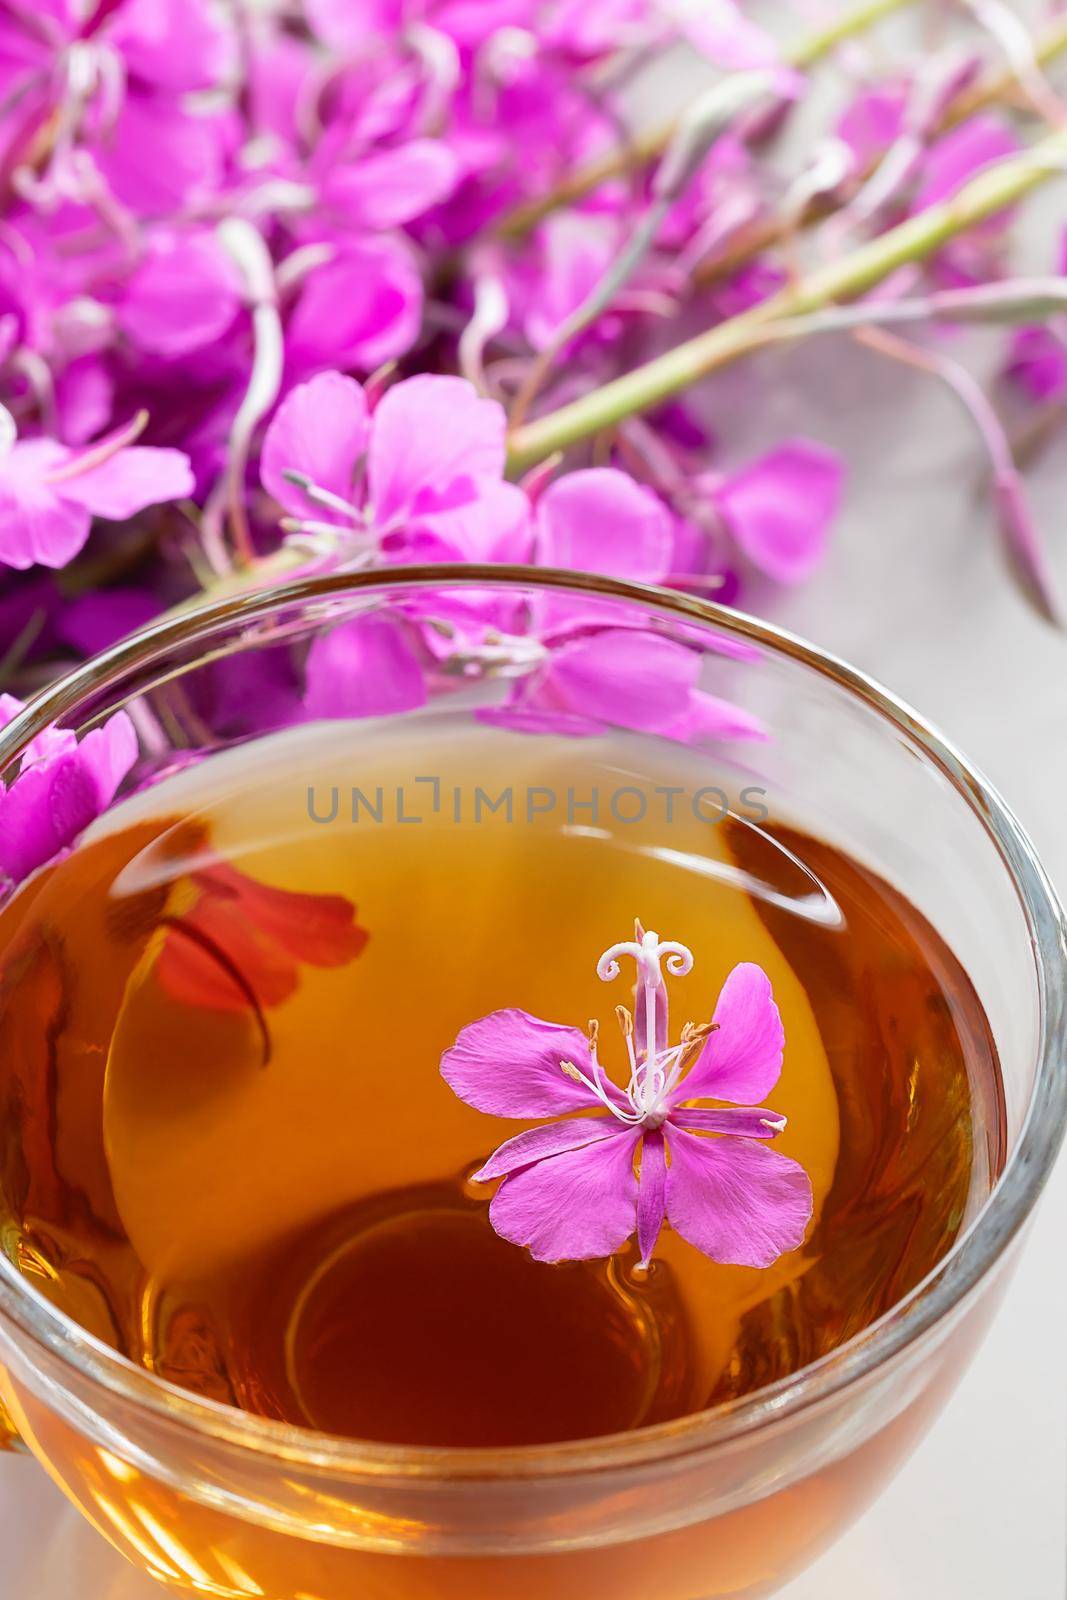 Fireweed herb known as blooming sally and tea in a cup, vertical